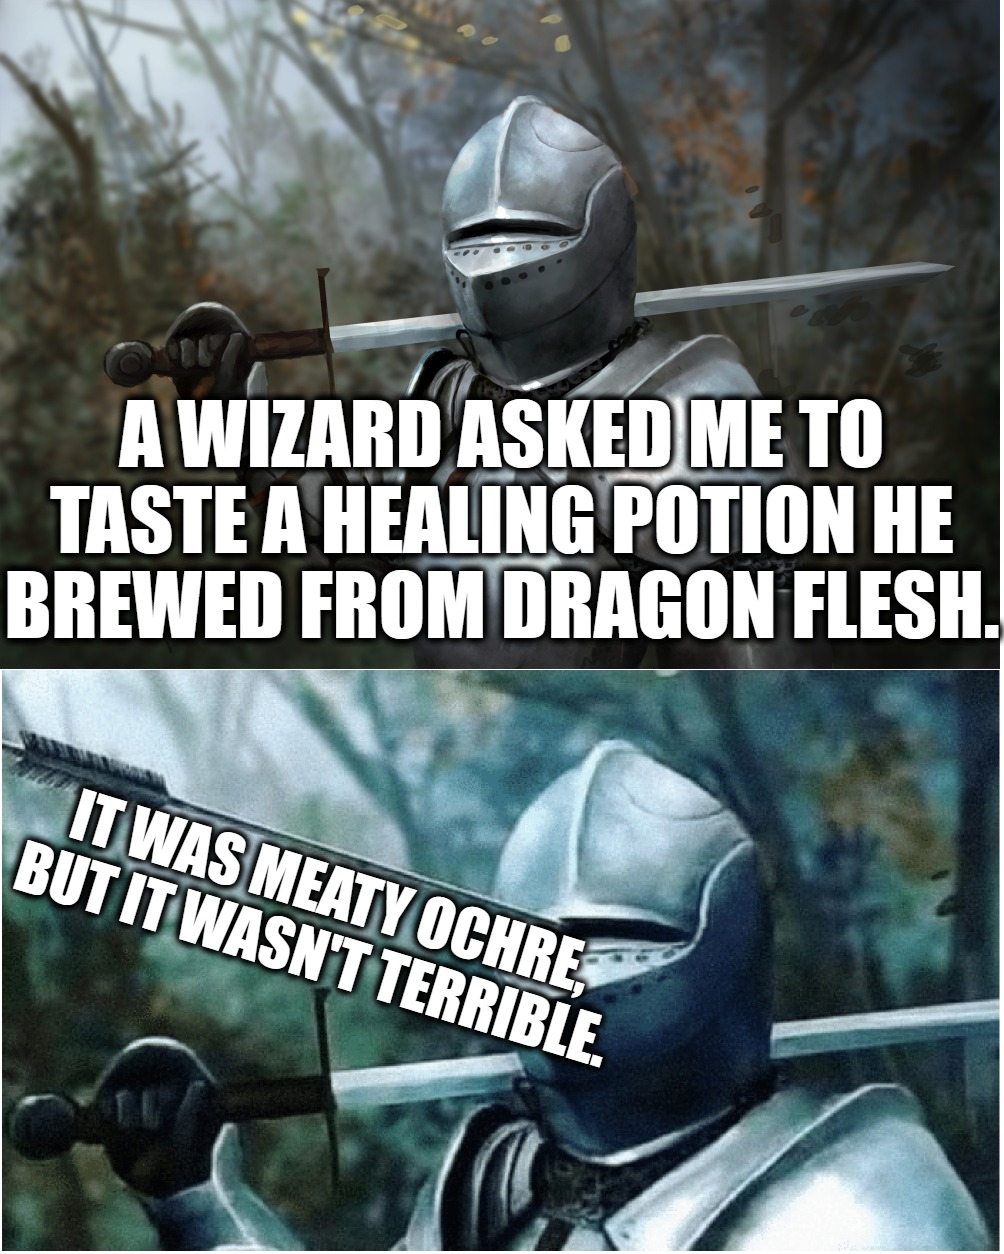 A mediocre pun | A WIZARD ASKED ME TO TASTE A HEALING POTION HE
BREWED FROM DRAGON FLESH. IT WAS MEATY OCHRE, BUT IT WASN'T TERRIBLE. | image tagged in knight with arrow in helmet | made w/ Imgflip meme maker